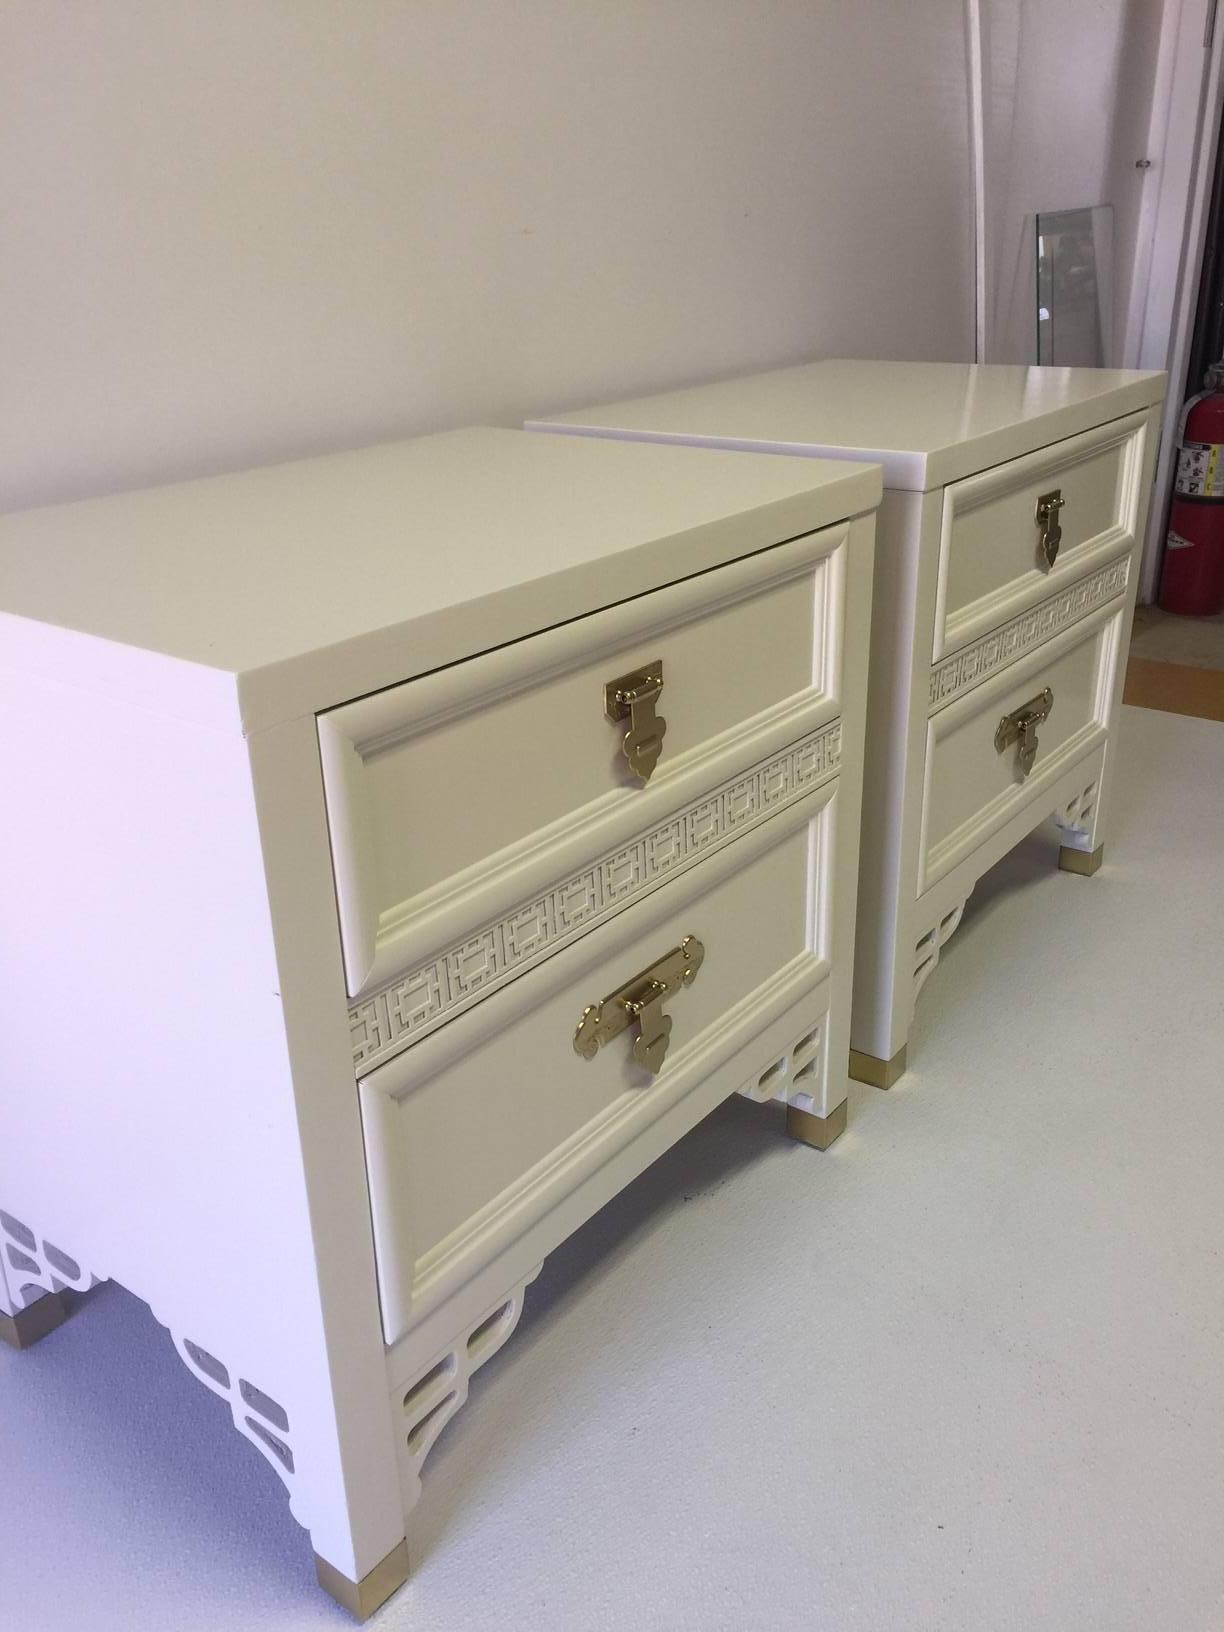 This gorgeous pair of Dixie Shangri-La nightstands has just been refurbished from top to bottom in a satin finish lacquer. Perfect for bedroom, sunroom, or living room.